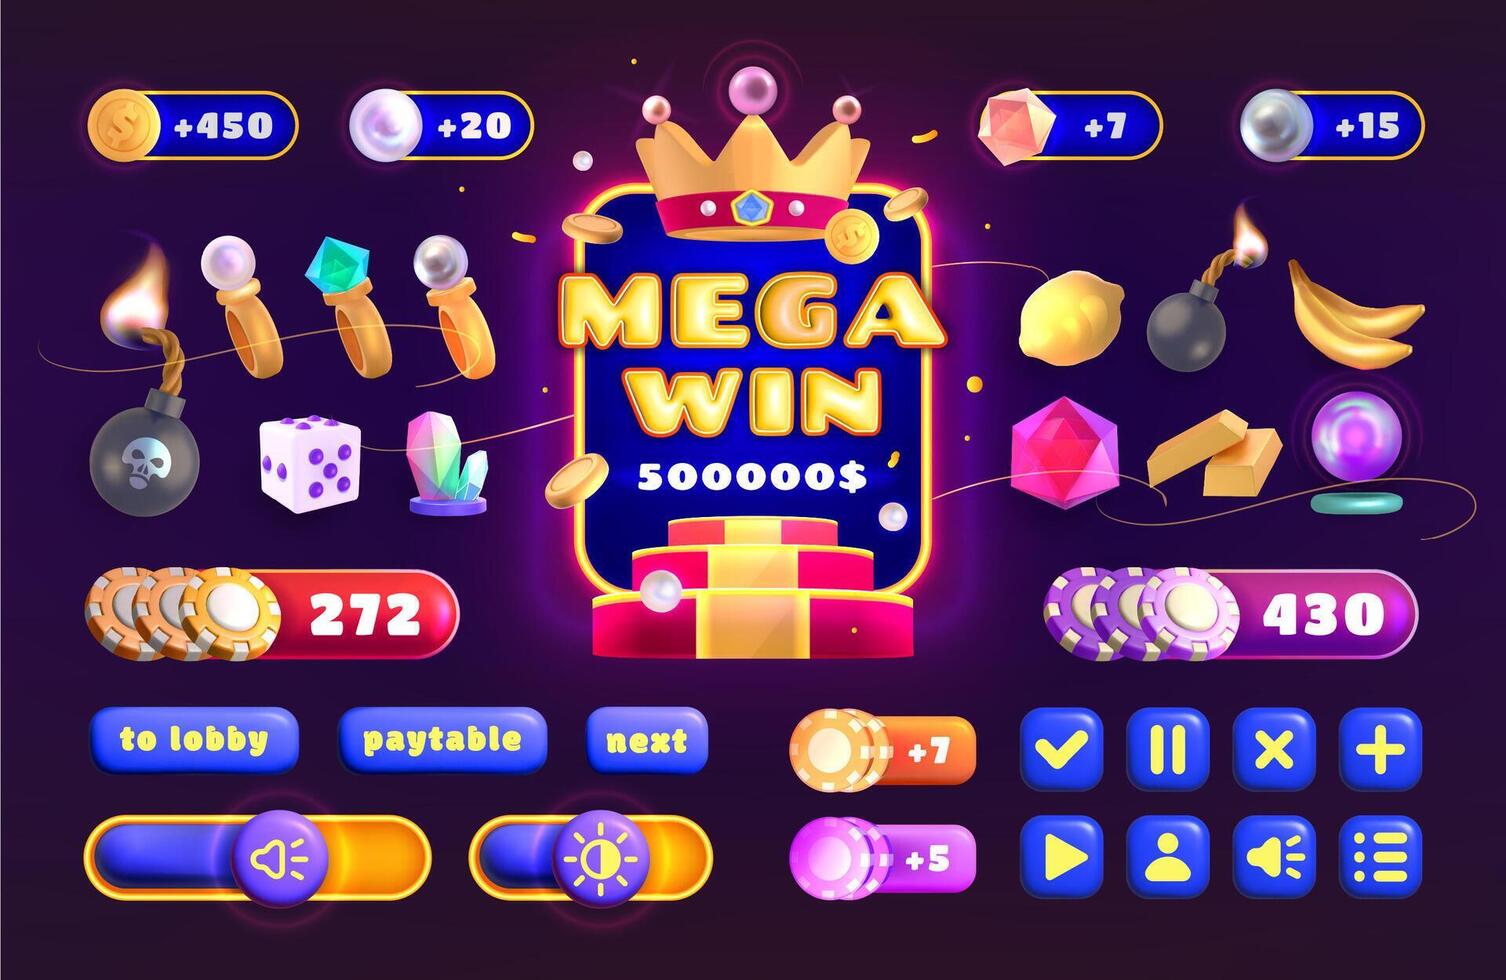 Casino icon for gambling ui game interface cartoon element set. Buttons and icons for slots game collection. Design interface elements, progress bars and lucky symbols for mobile gamble app . vector